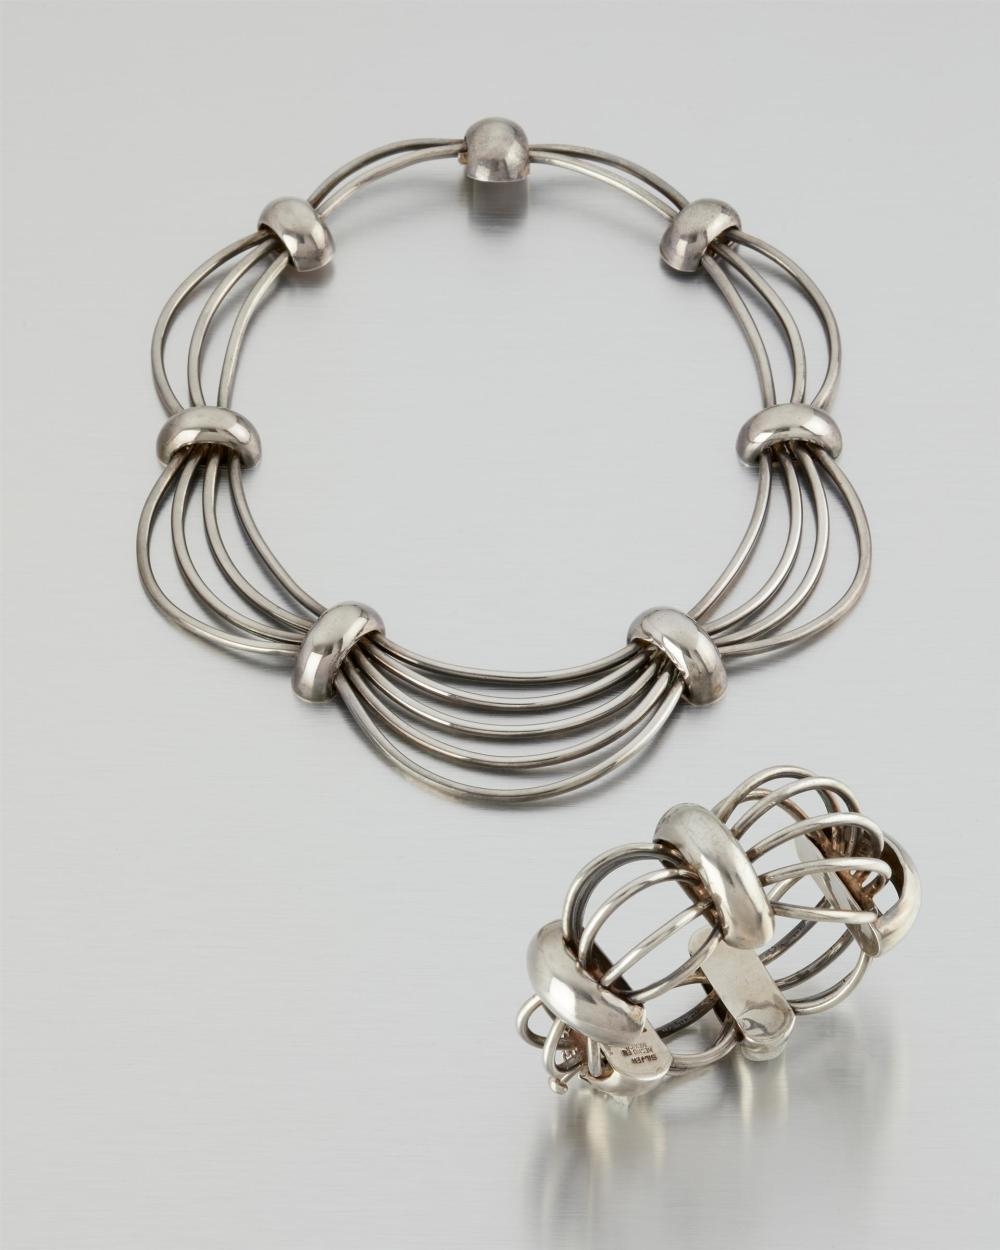 A set of silver "Birdcage" jewelry by Antonio Pineda